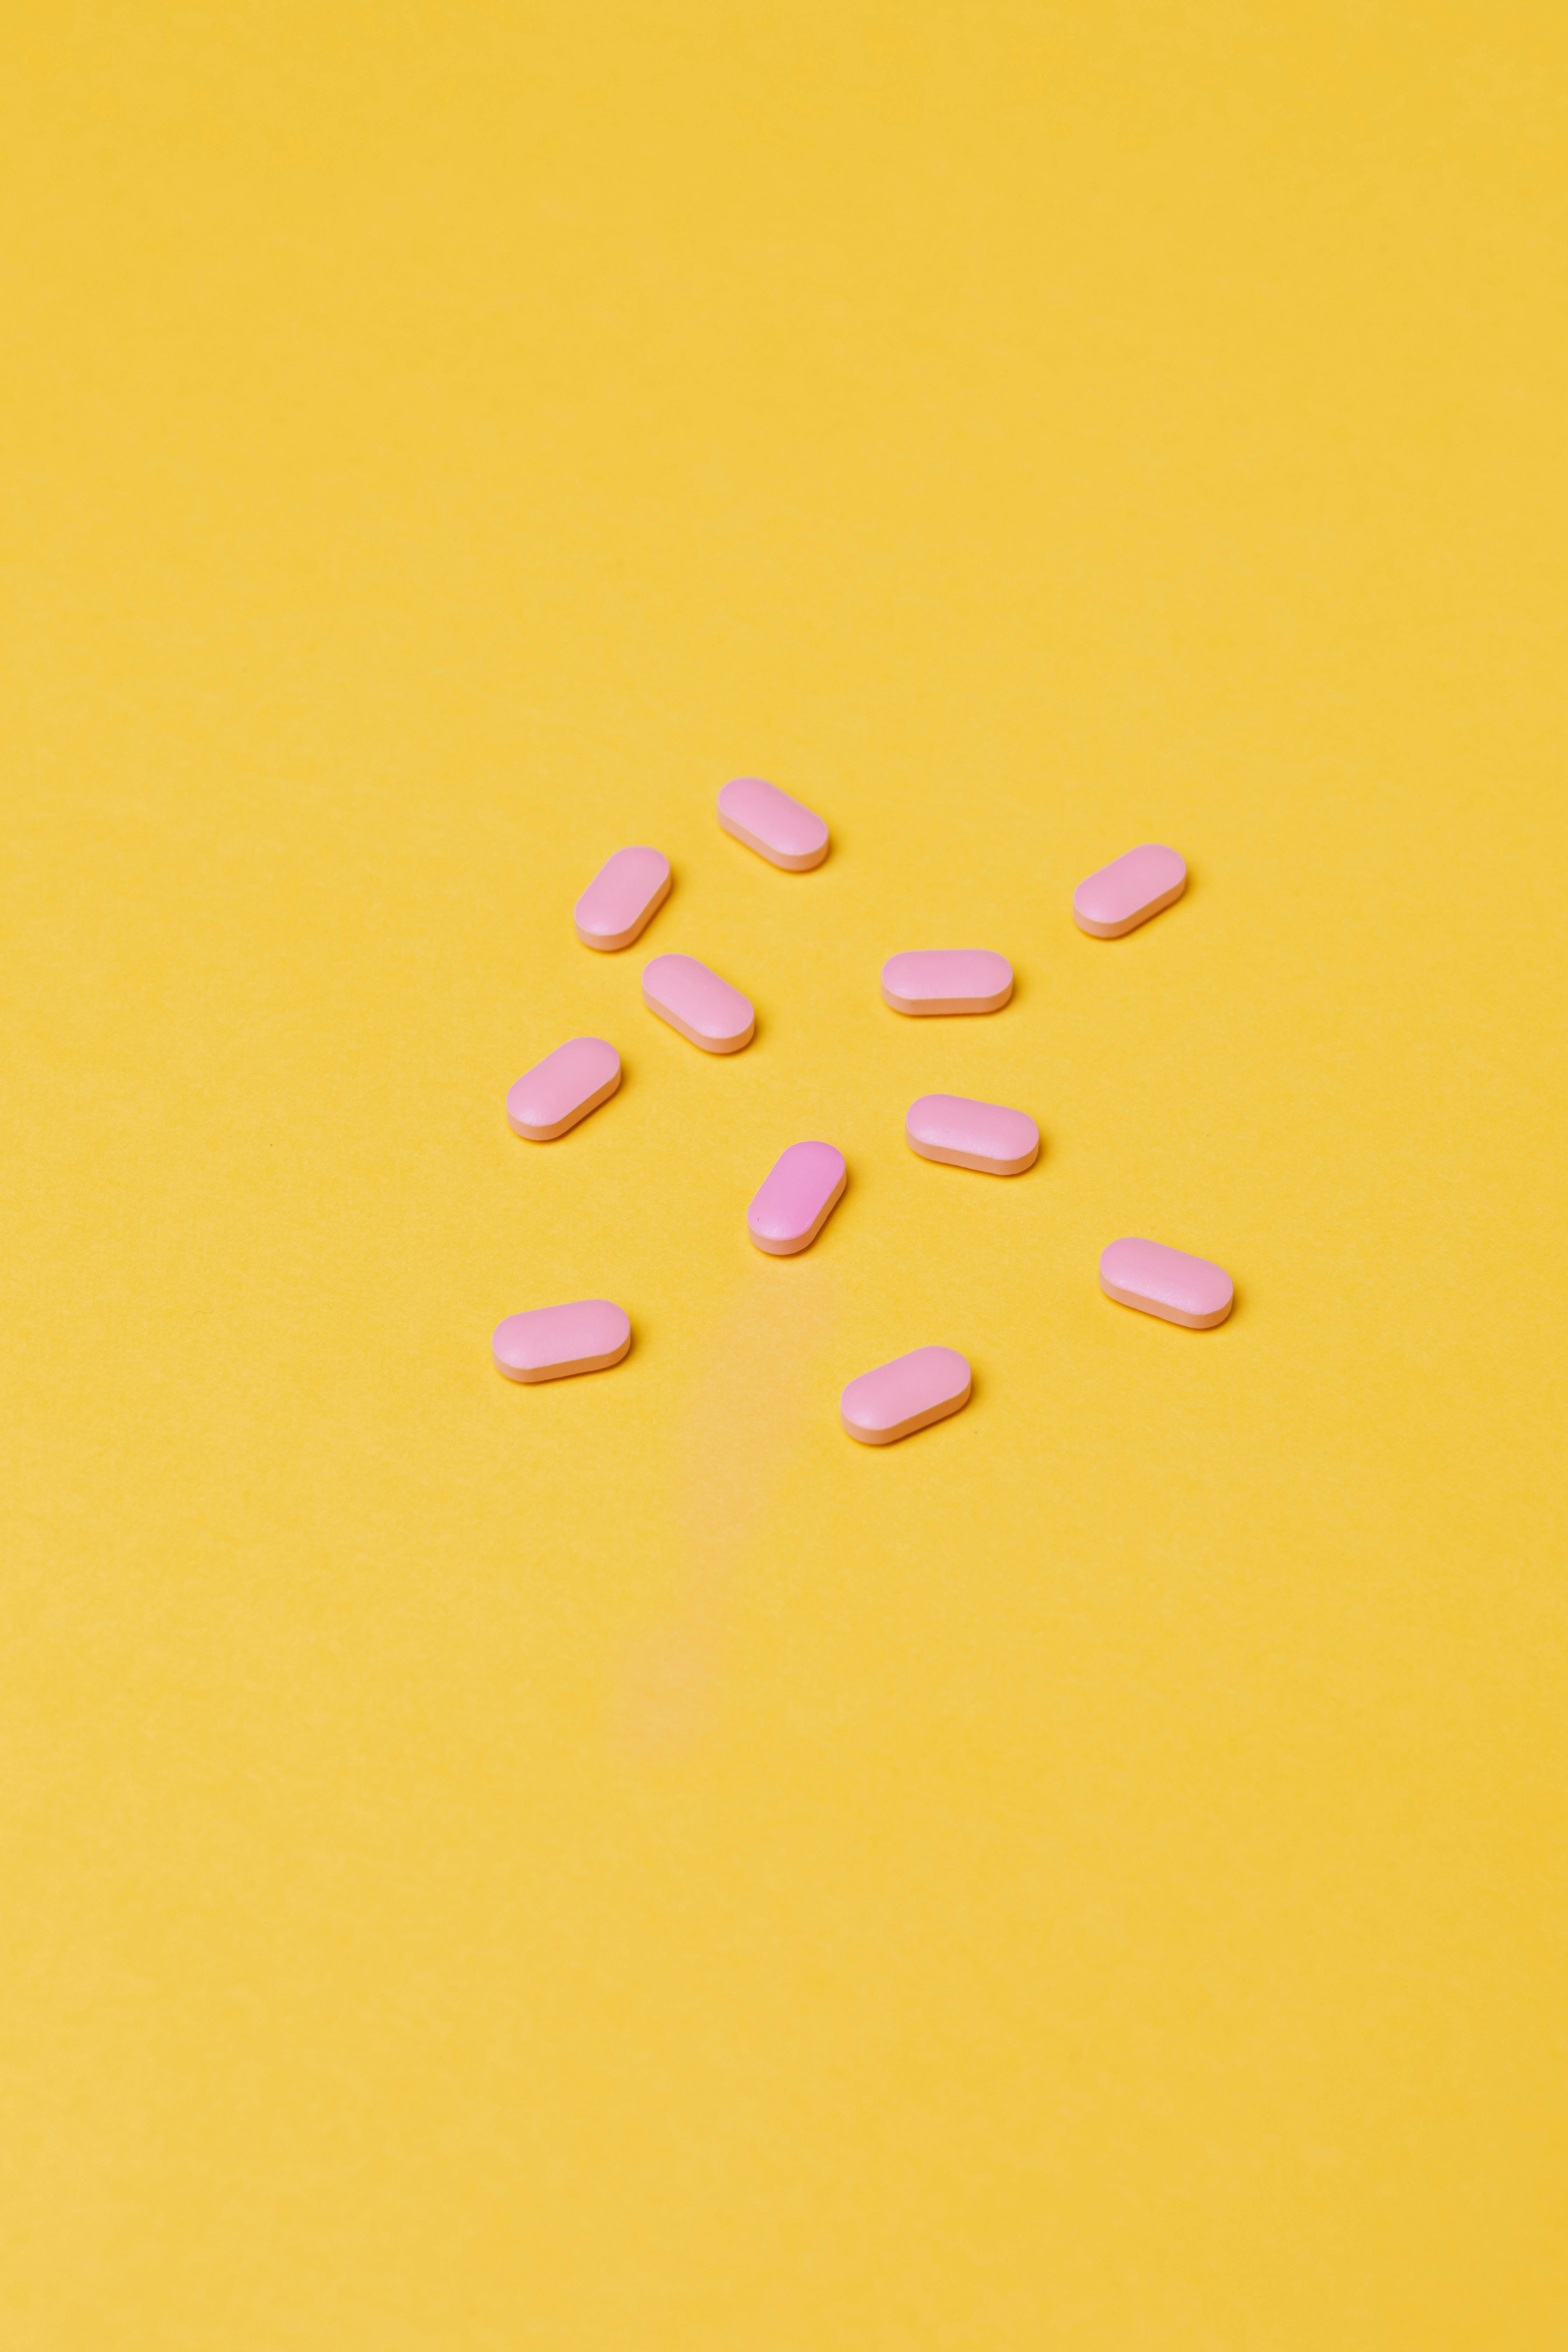 Pink Medicines On Yellow Background · Free Stock Photo